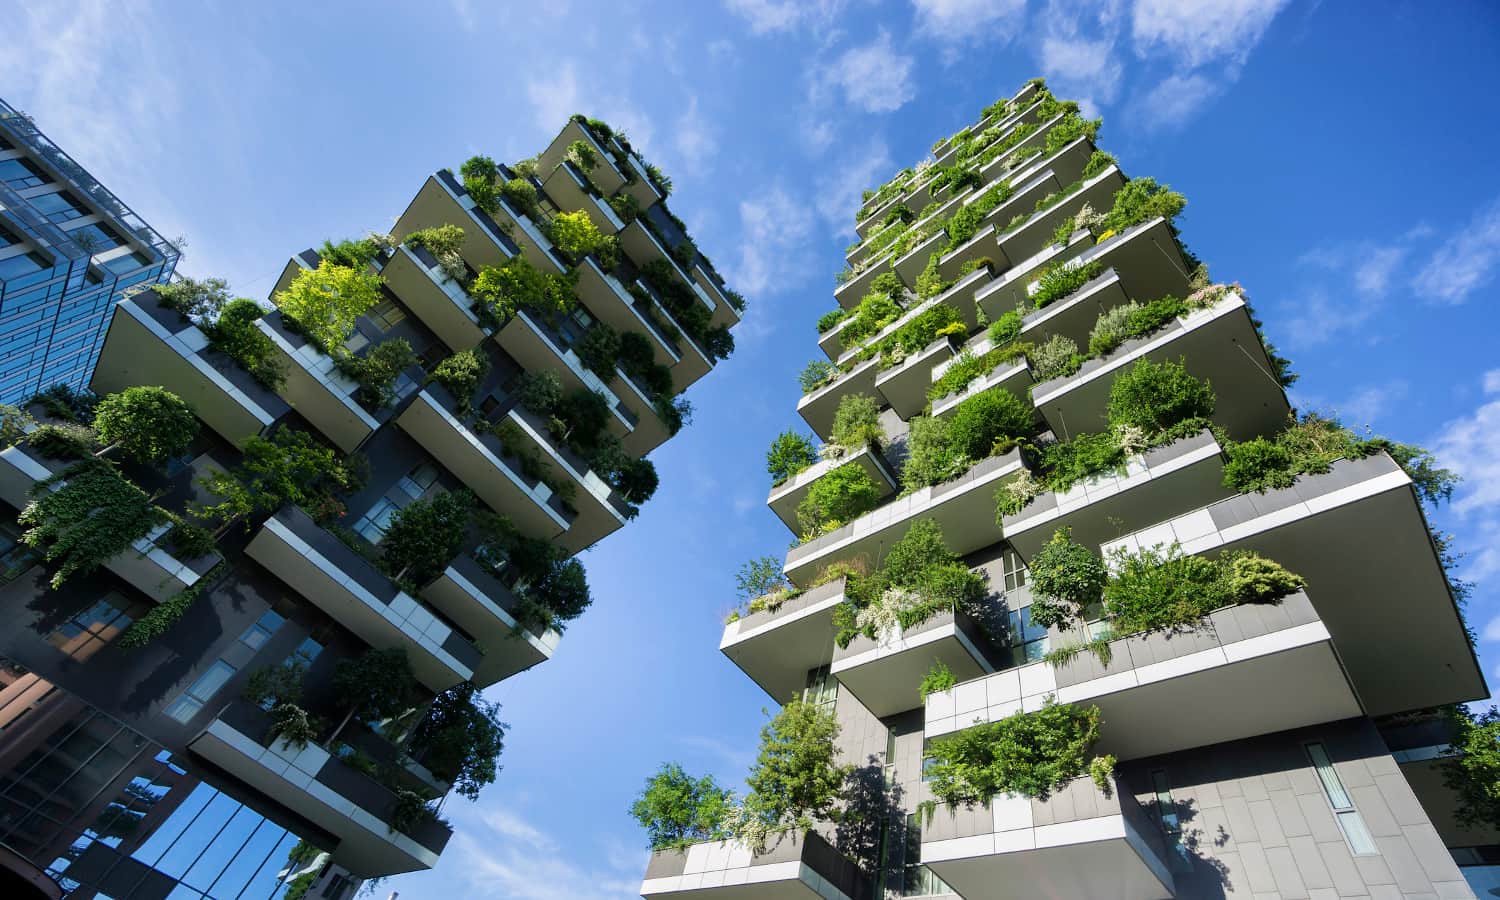 Future of vertical farming and urban agriculture